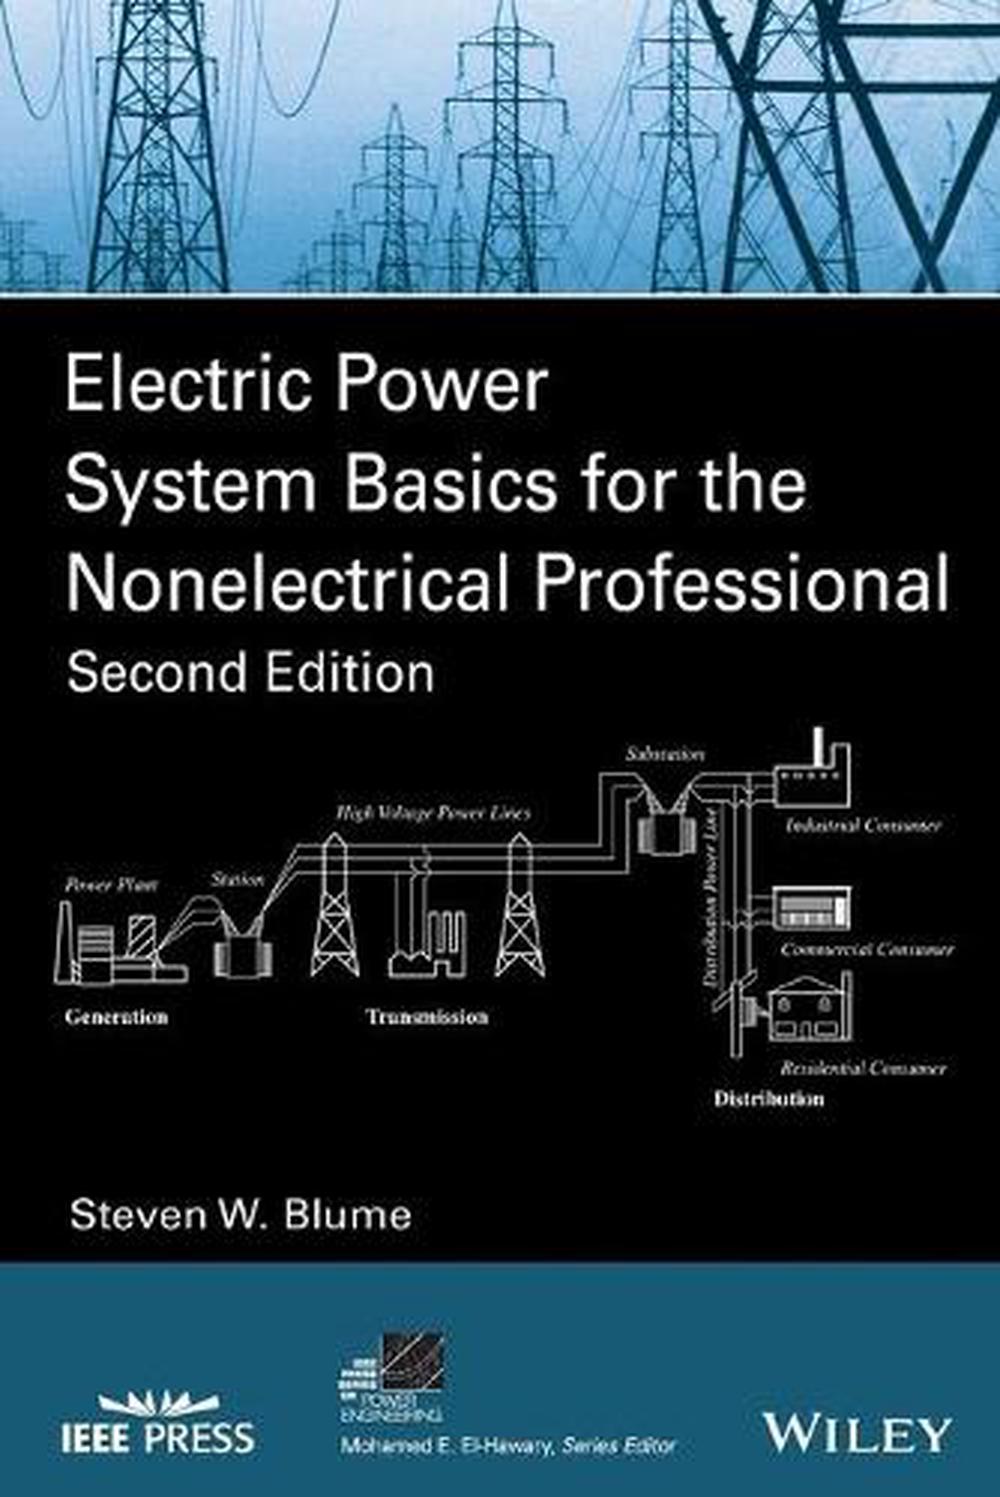 Electric Power System Basics for the Nonelectrical Professional by